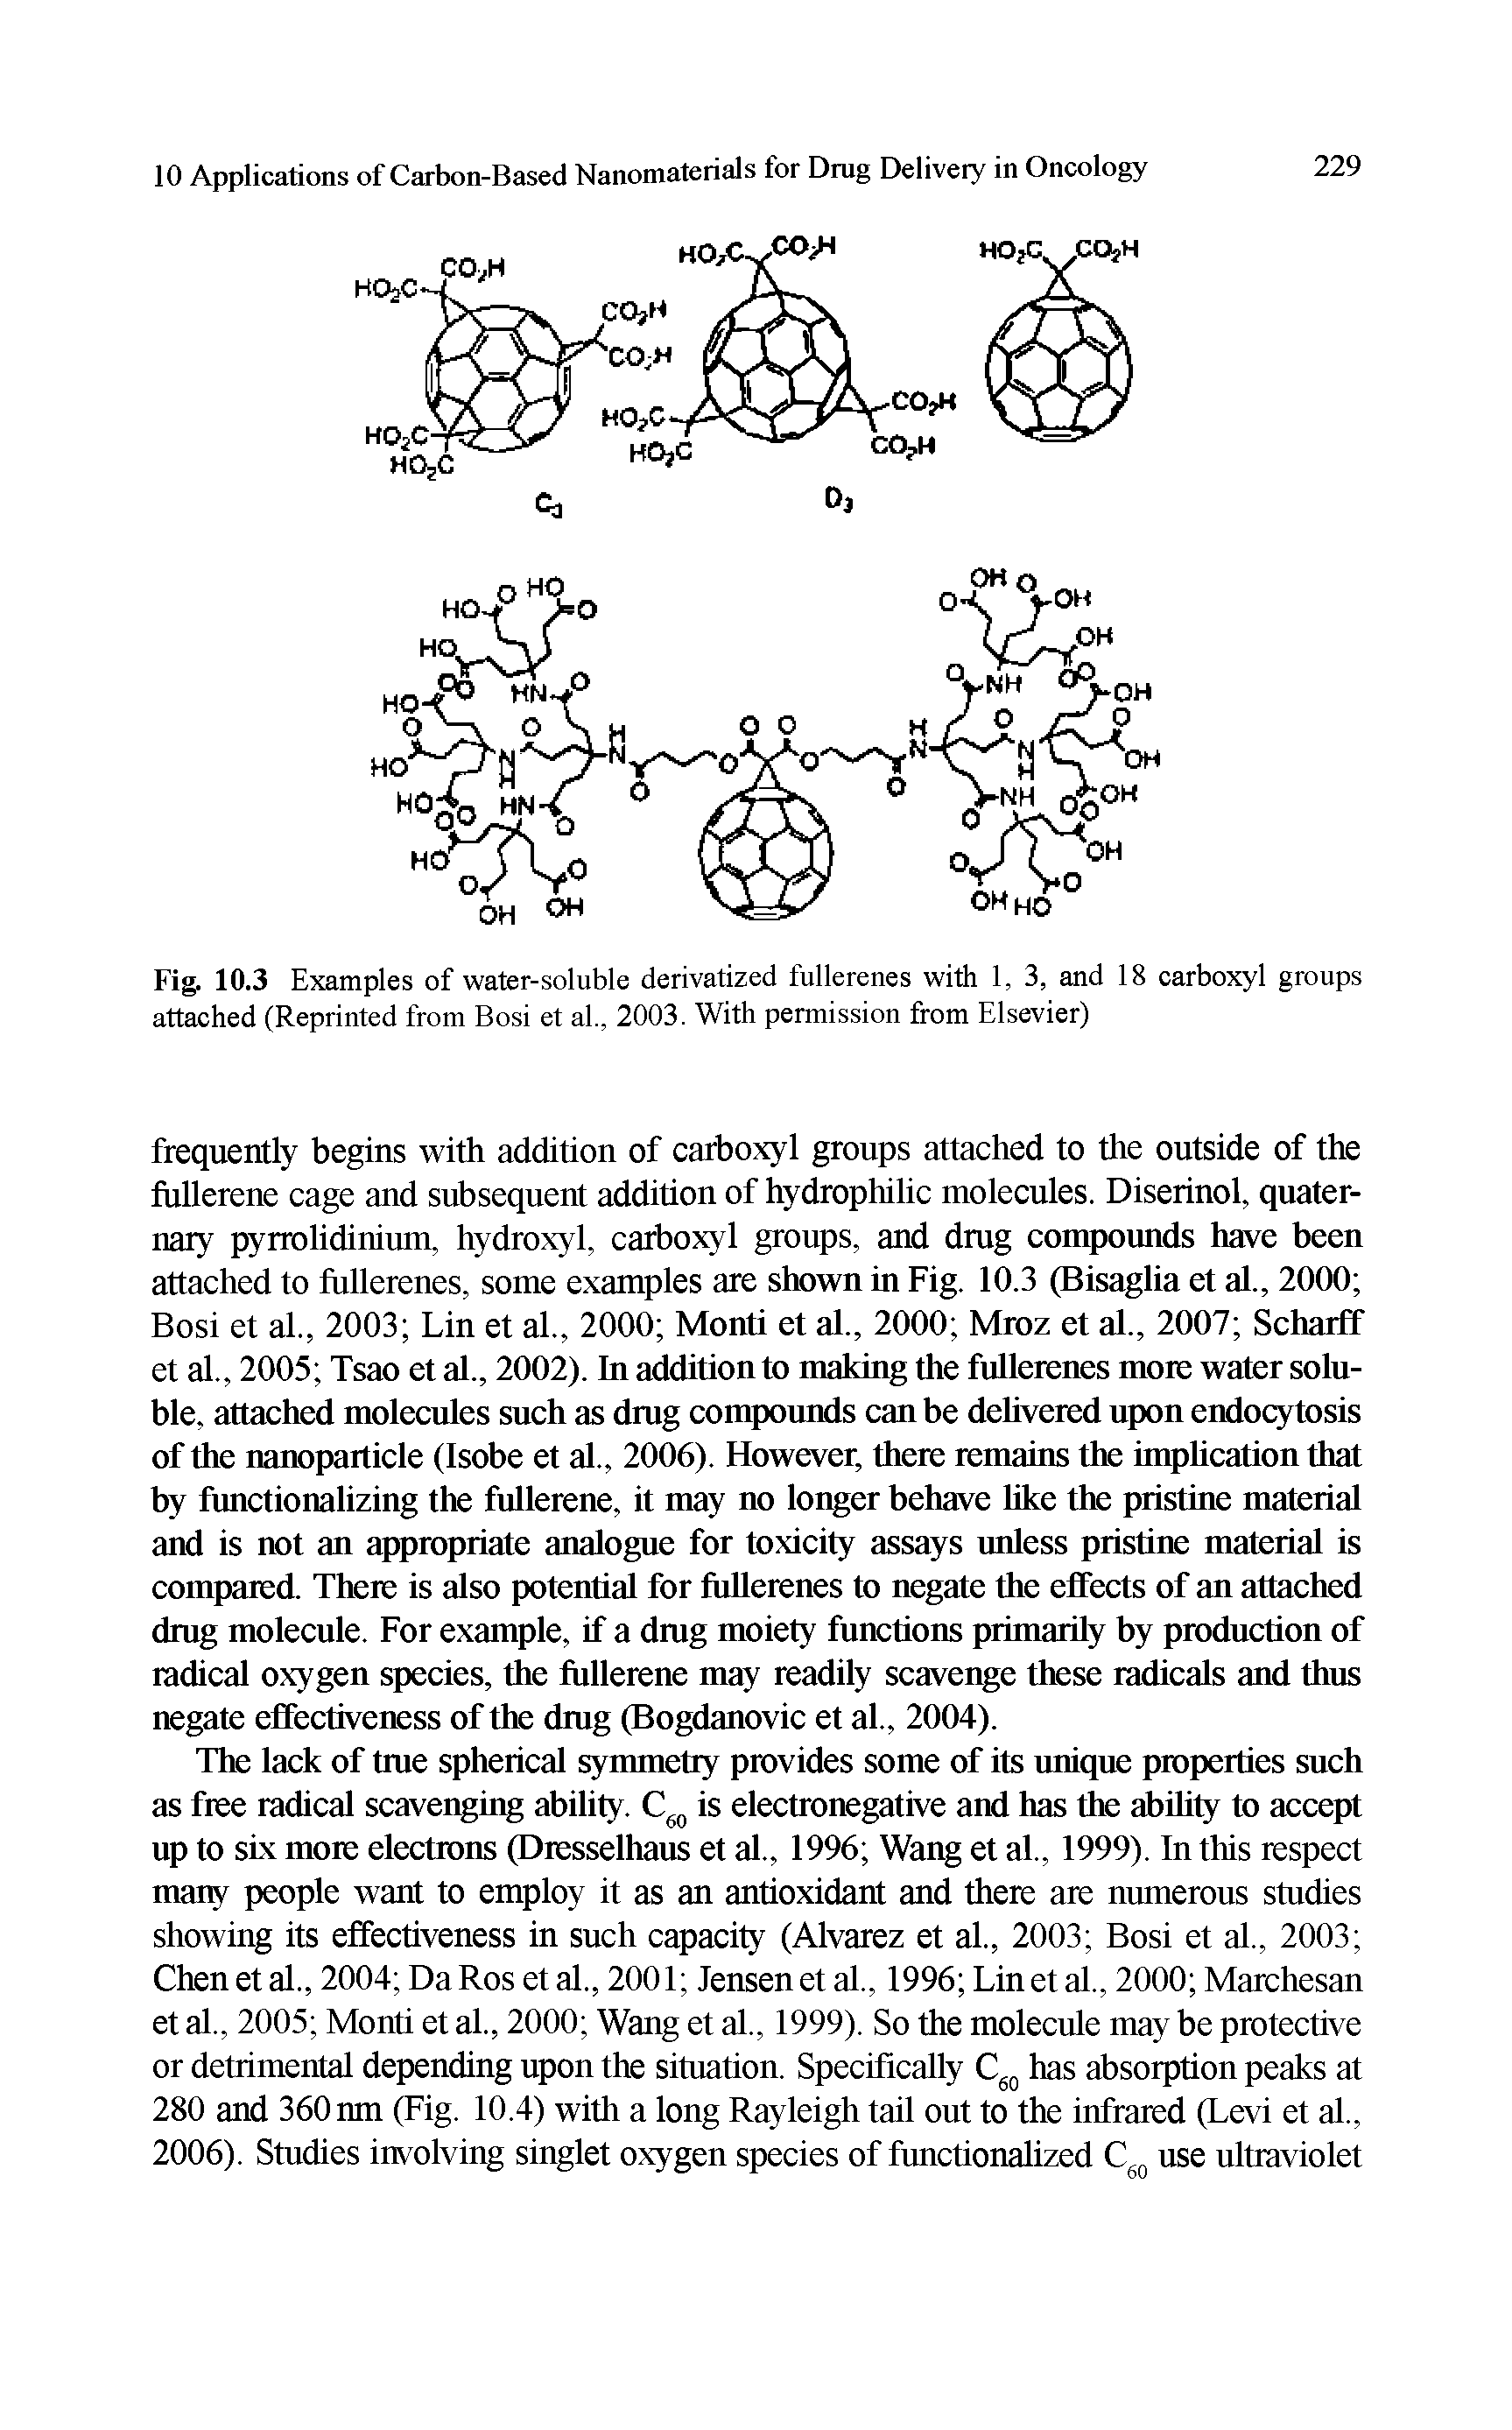 Fig. 10.3 Examples of water-soluble derivatized fullerenes with 1, 3, and 18 carboxyl groups attached (Reprinted from Bosi et al., 2003. With permission from Elsevier)...